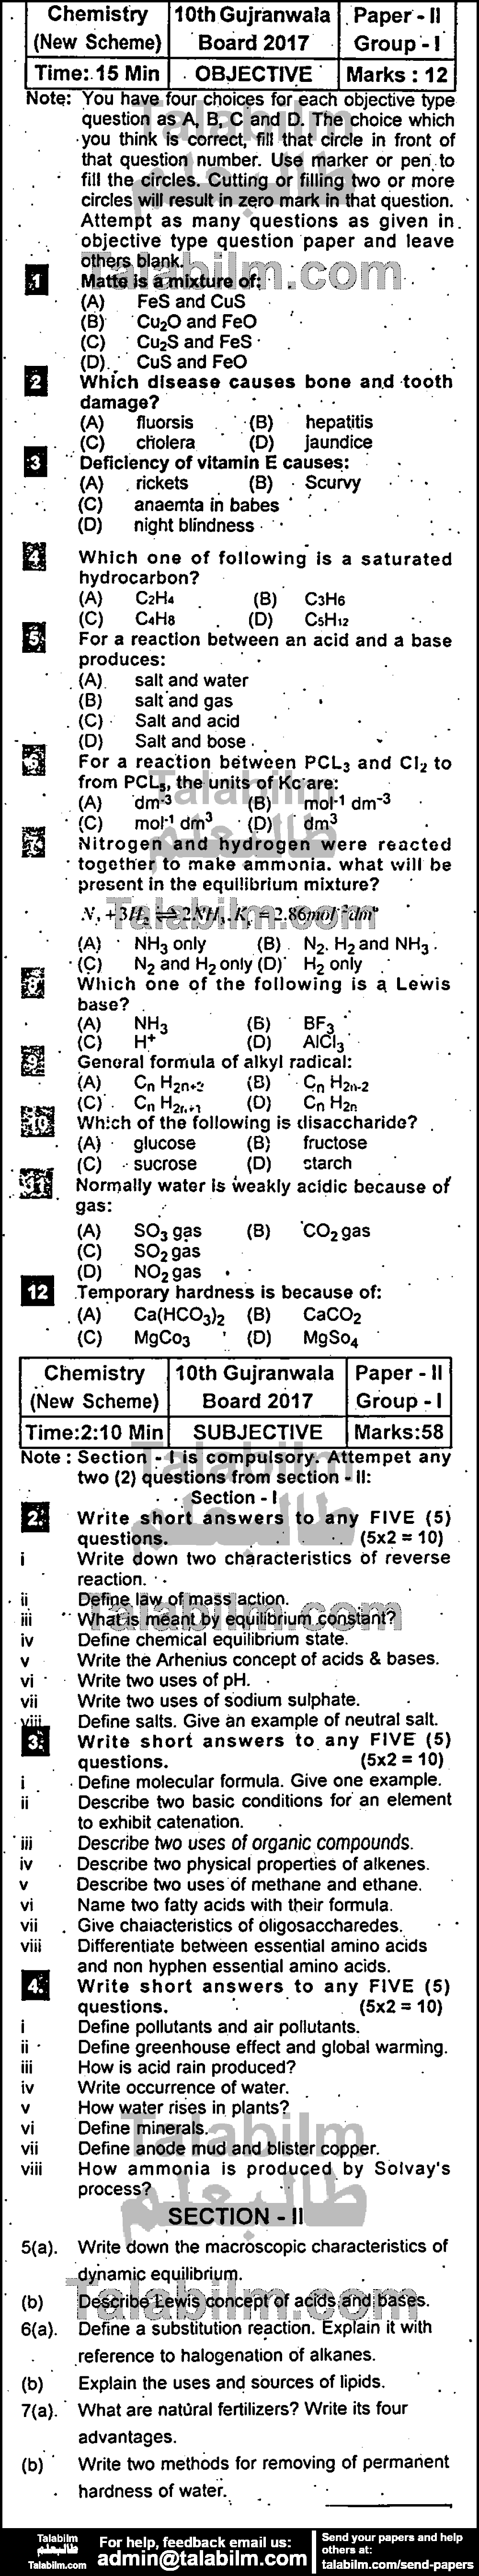 Chemistry 0 past paper for 2017 Group-I